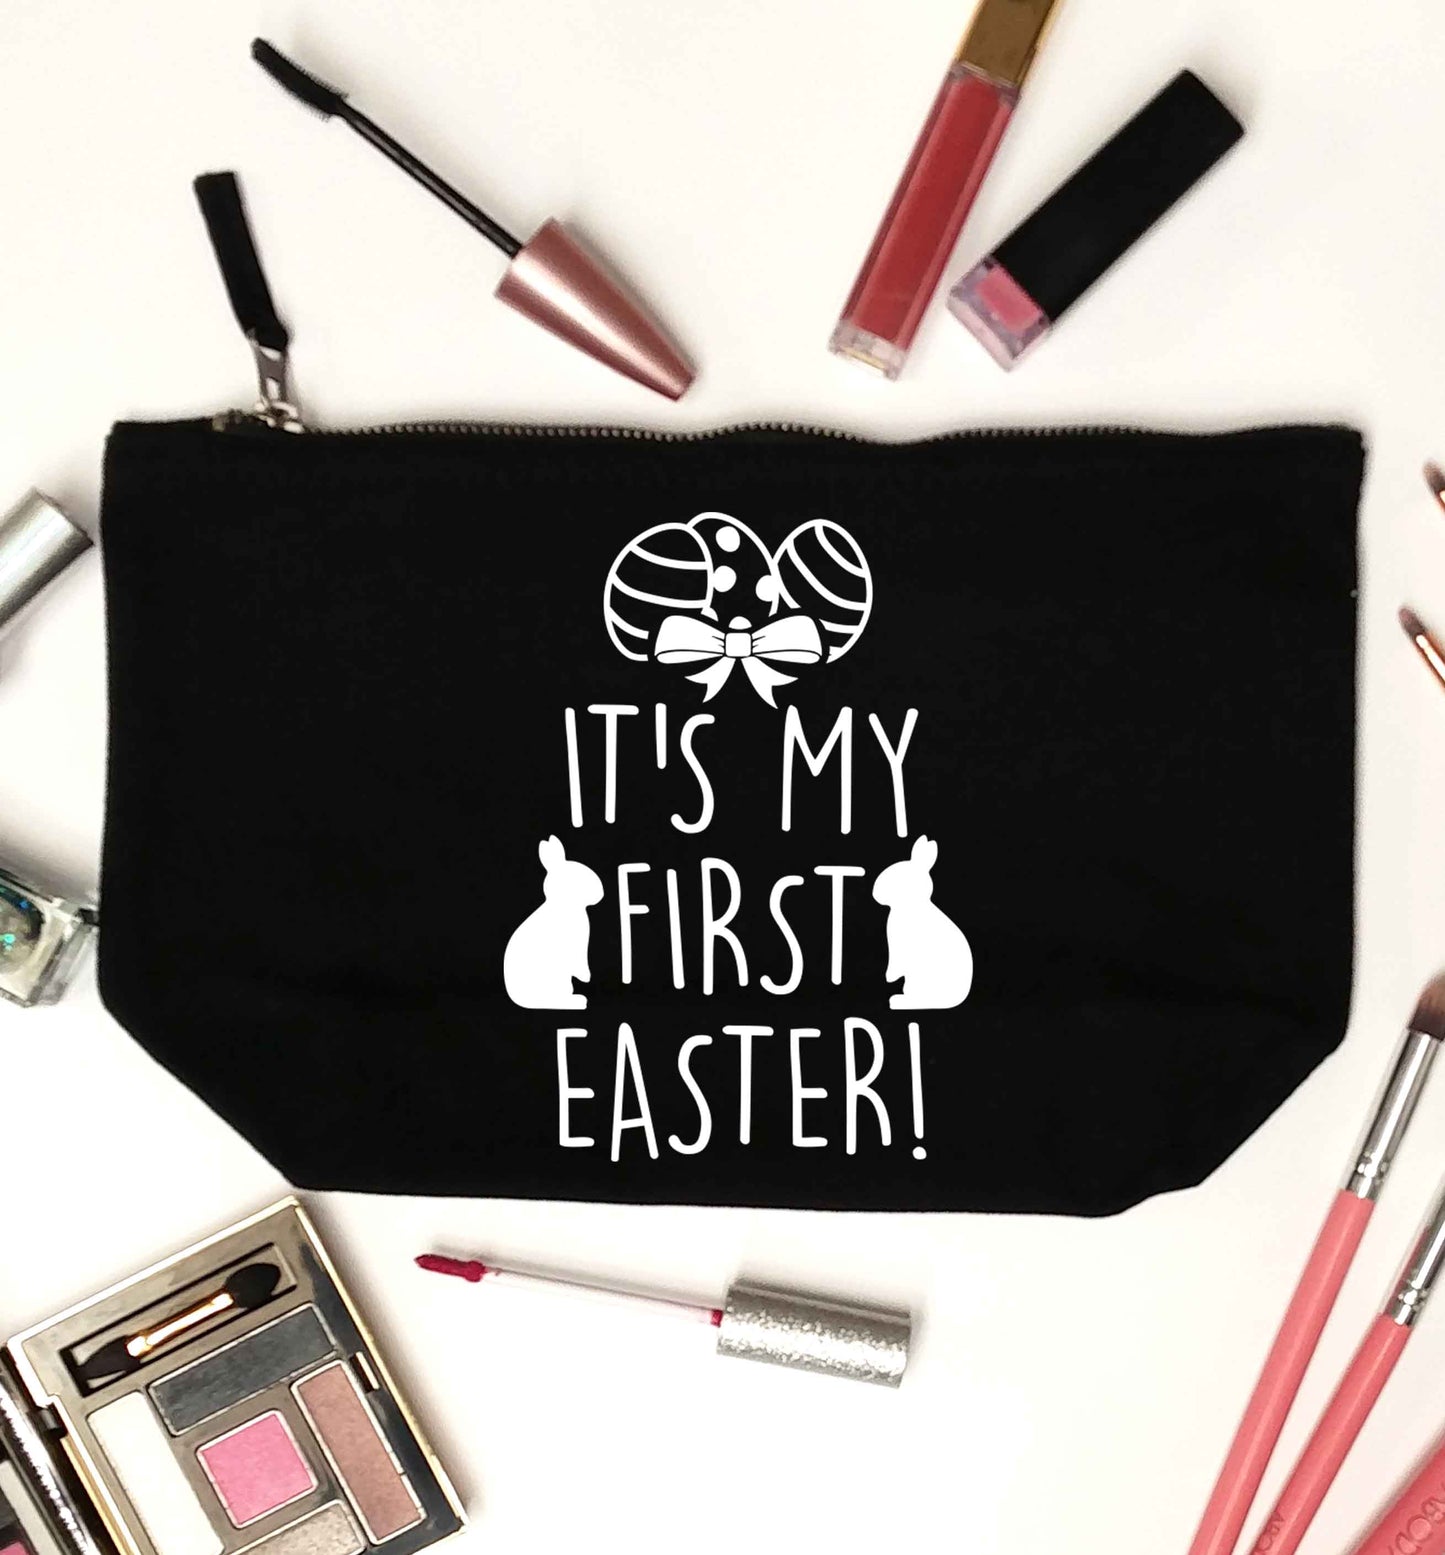 It's my first Easter black makeup bag